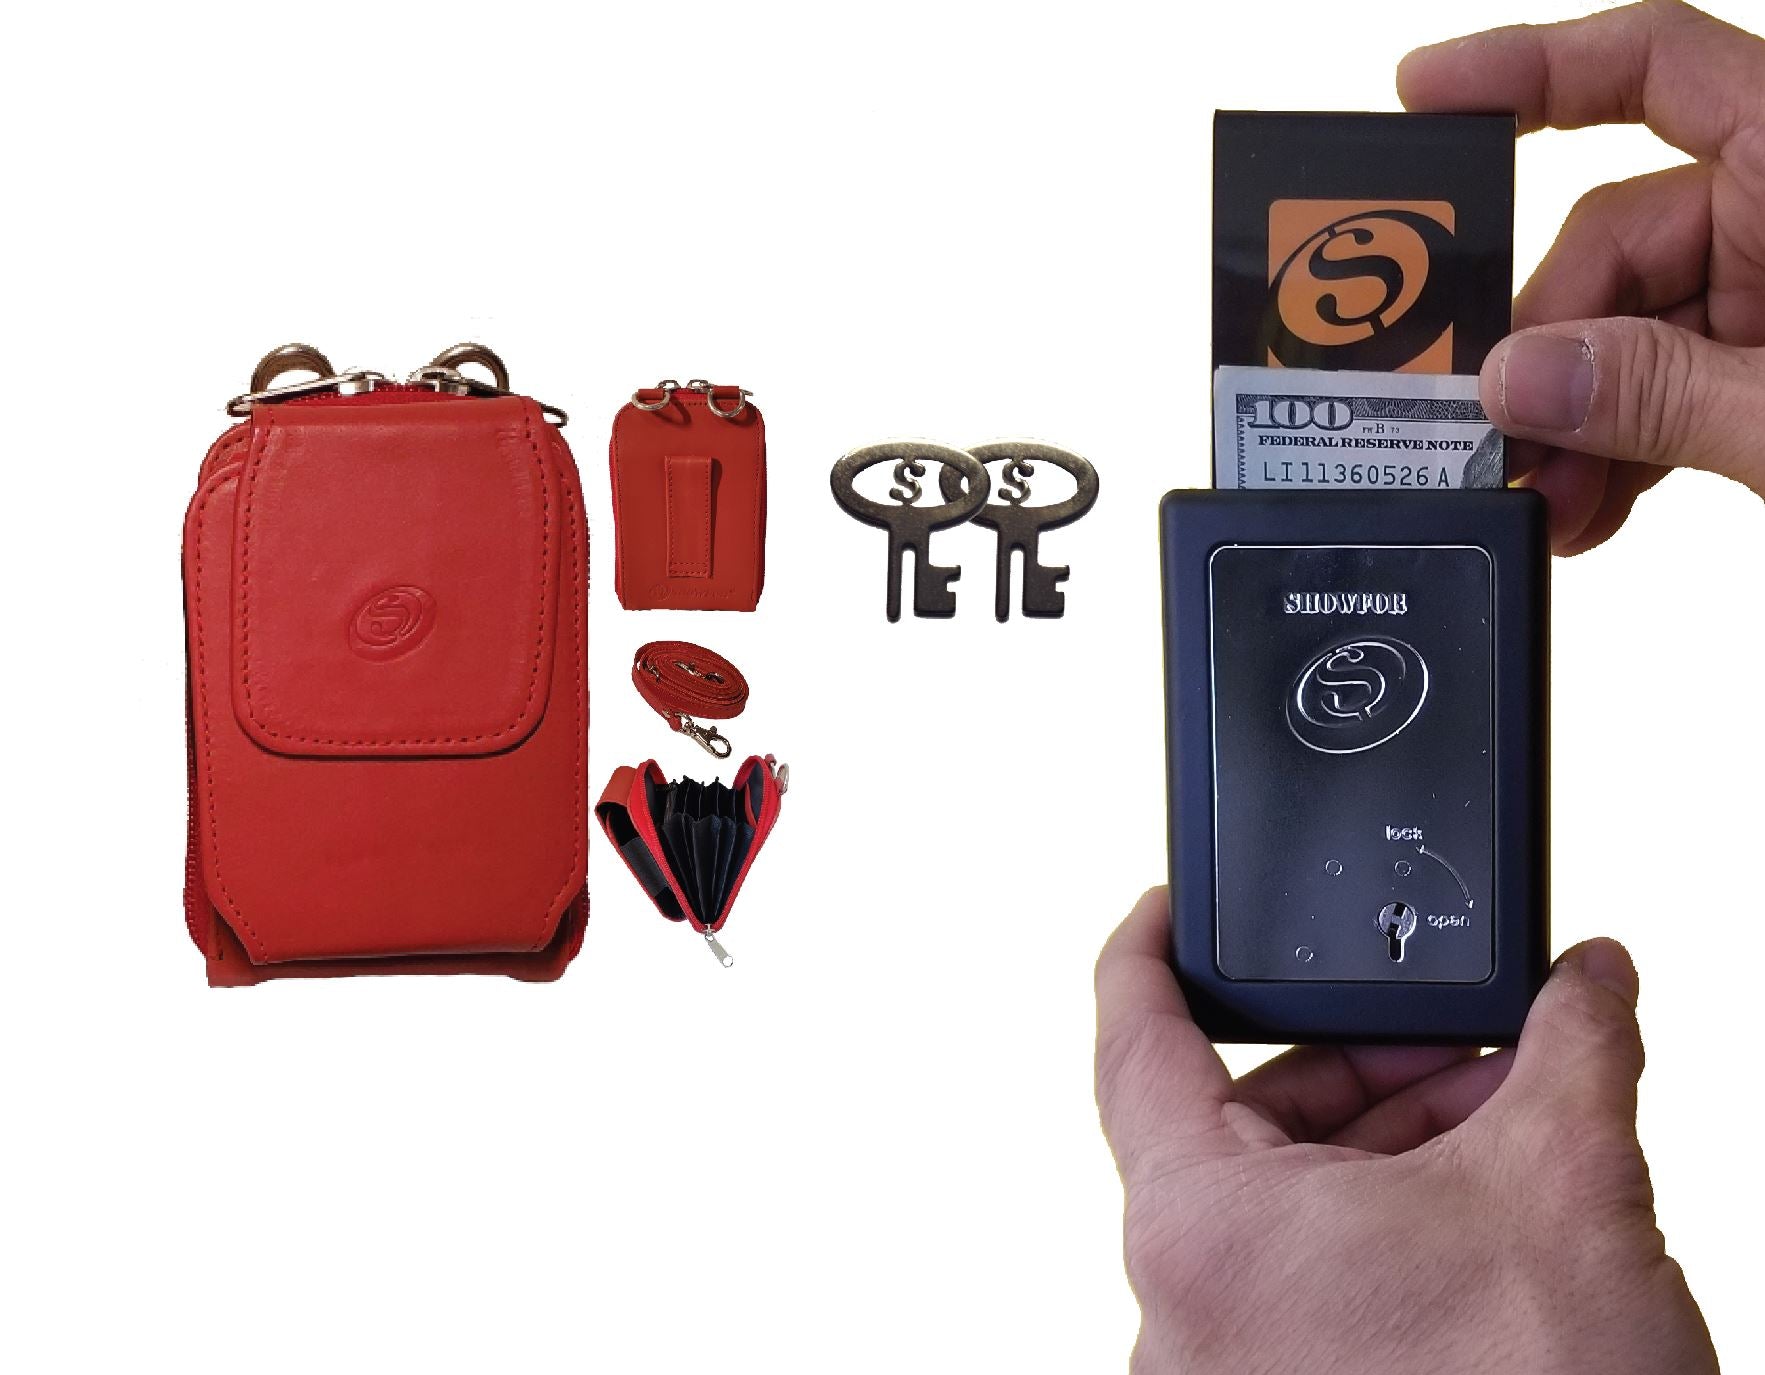 The Showfor Black Winners Bank with Red Leather Case bundle, offering stylish design and practicality.